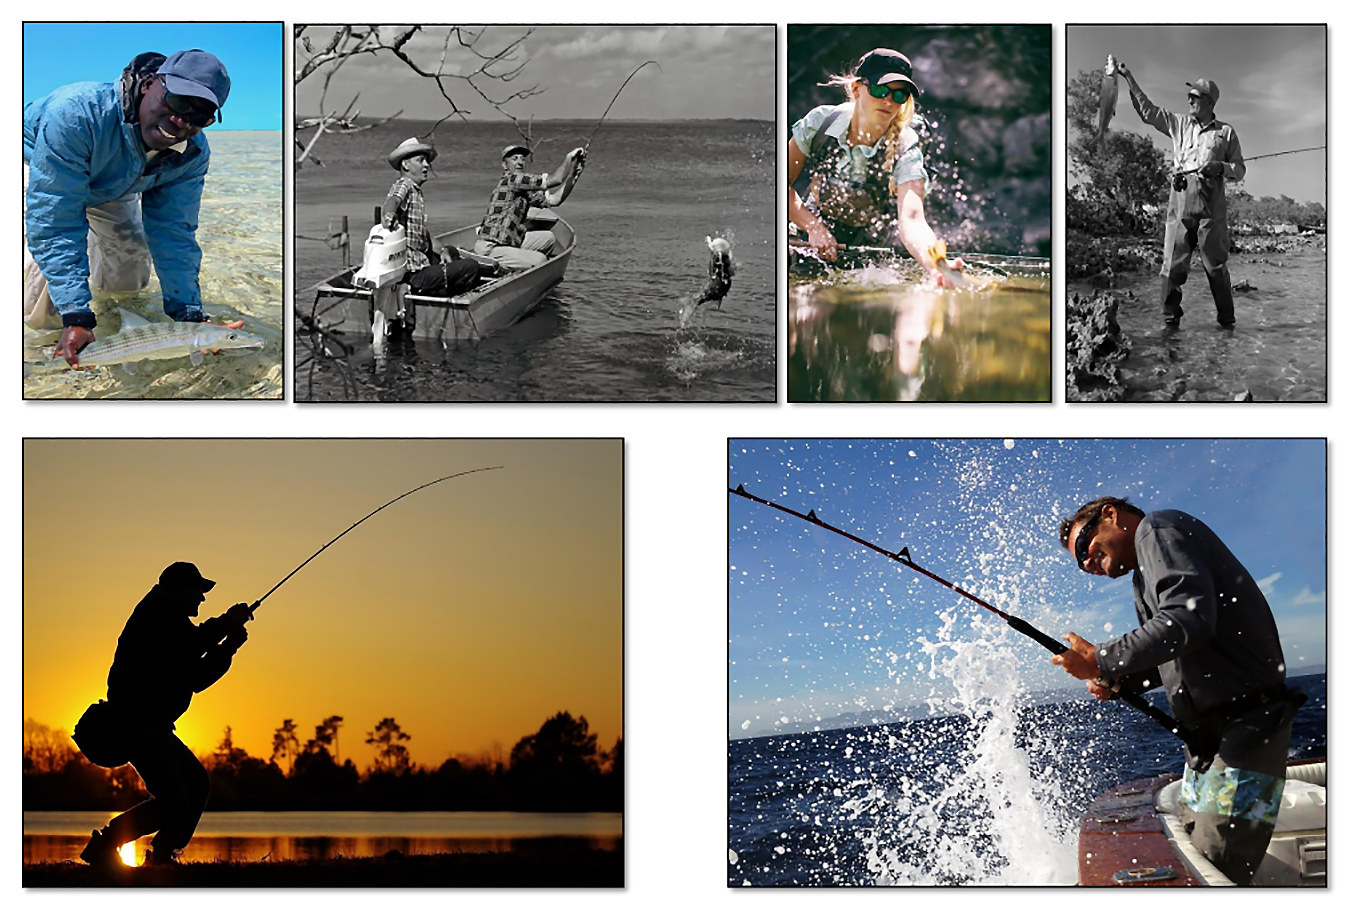 4A-HISTORY OF SPORTFISHING, CH. 4, pics only